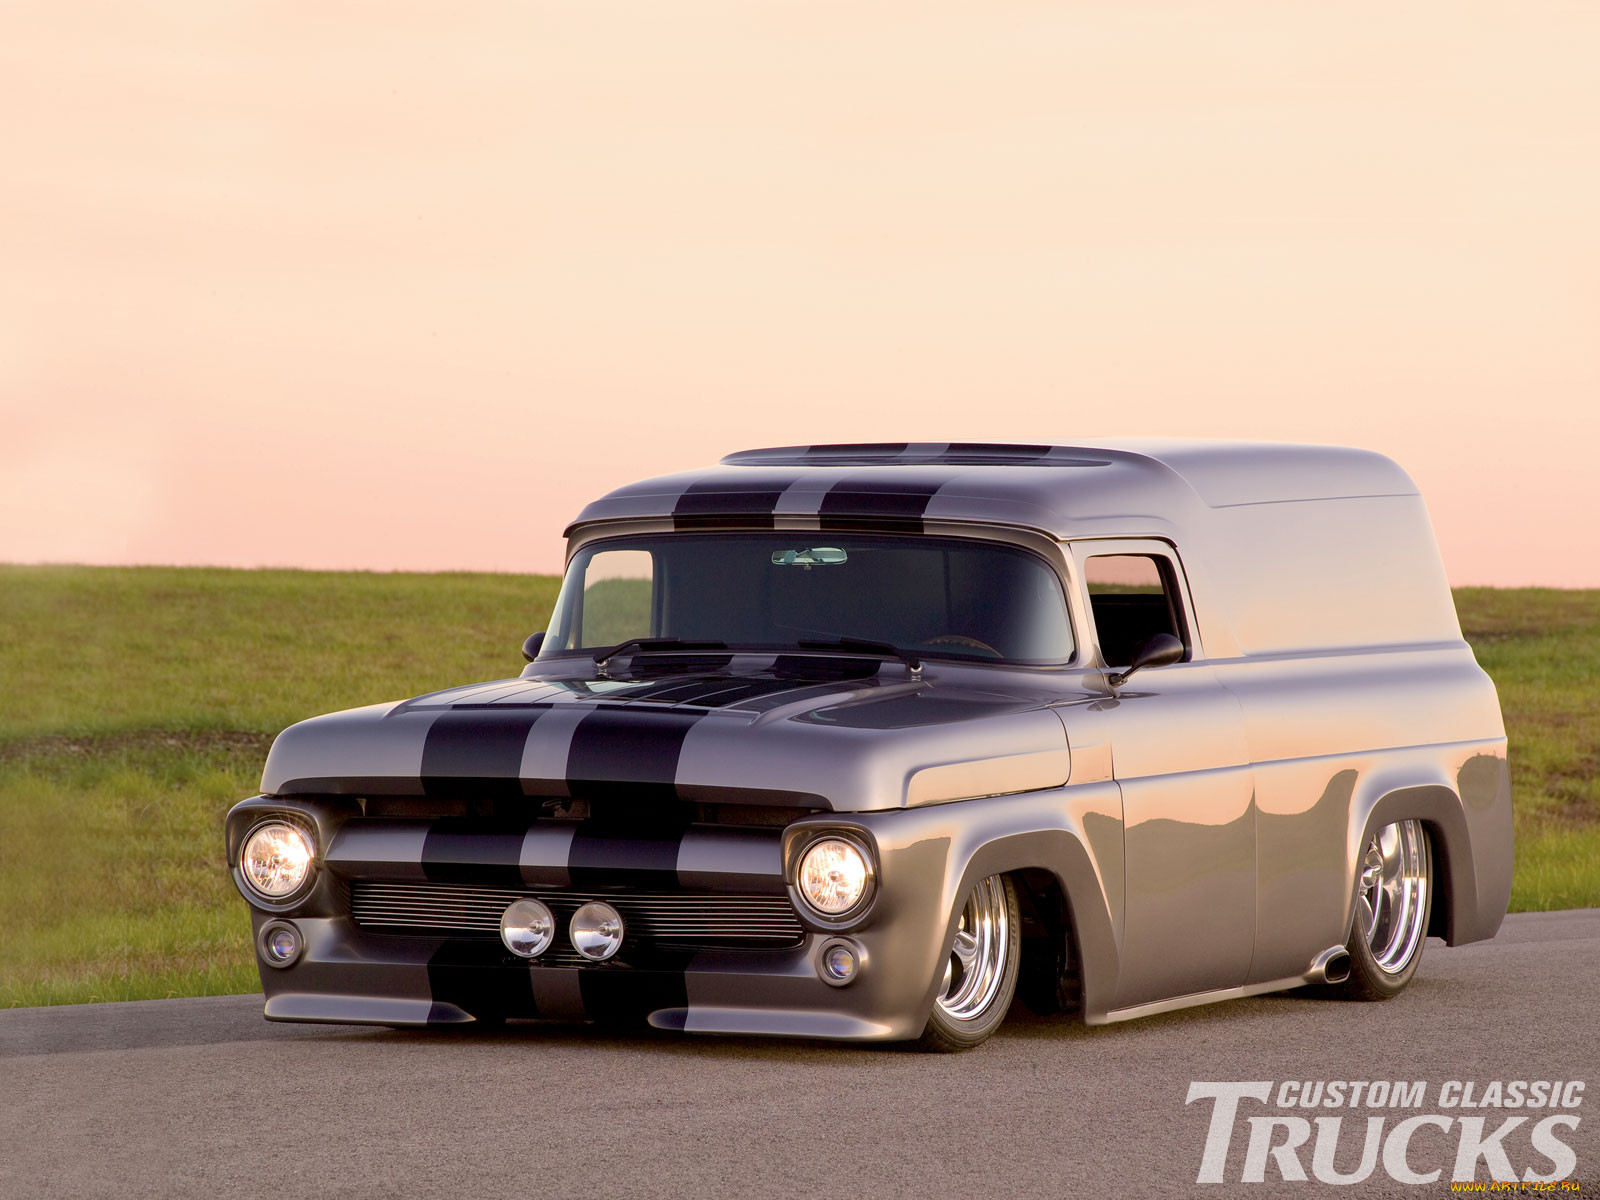 1957, ford, delivery, , custom, van`s